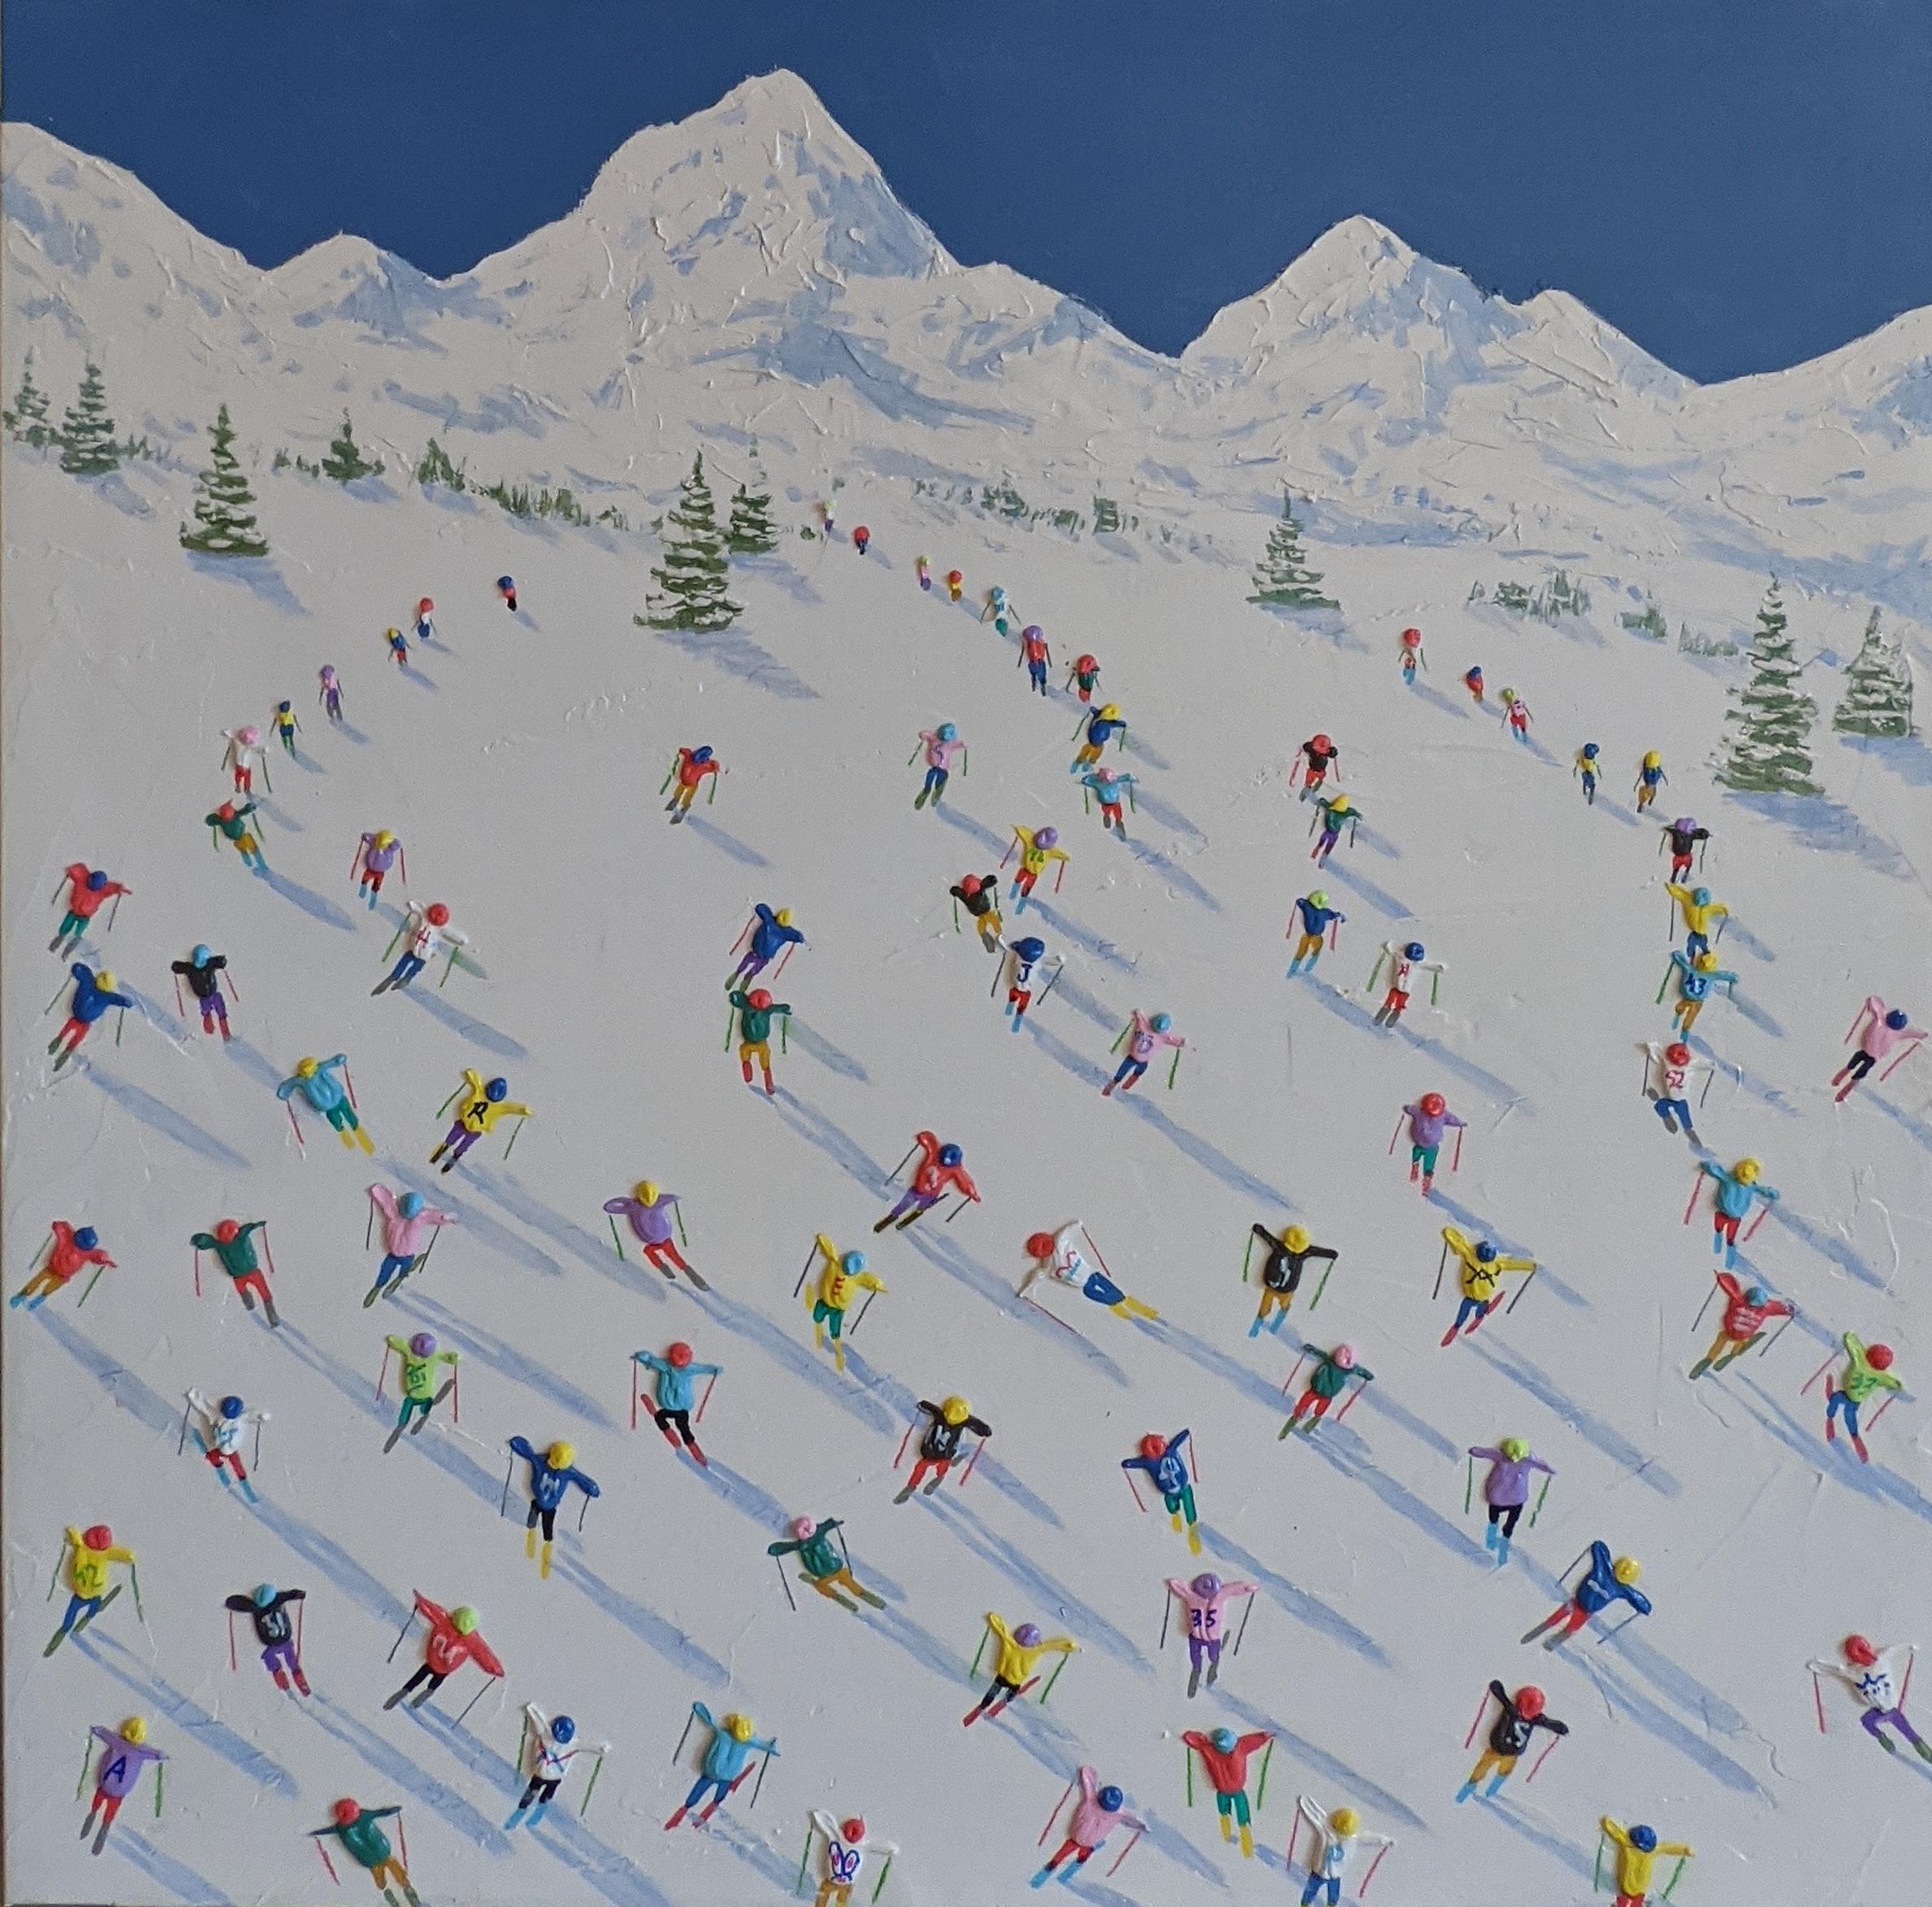 Max Todd Figurative Painting - 'Freestyle Skiing' Contemporary 3D Figurative & Alpine Landscape Painting